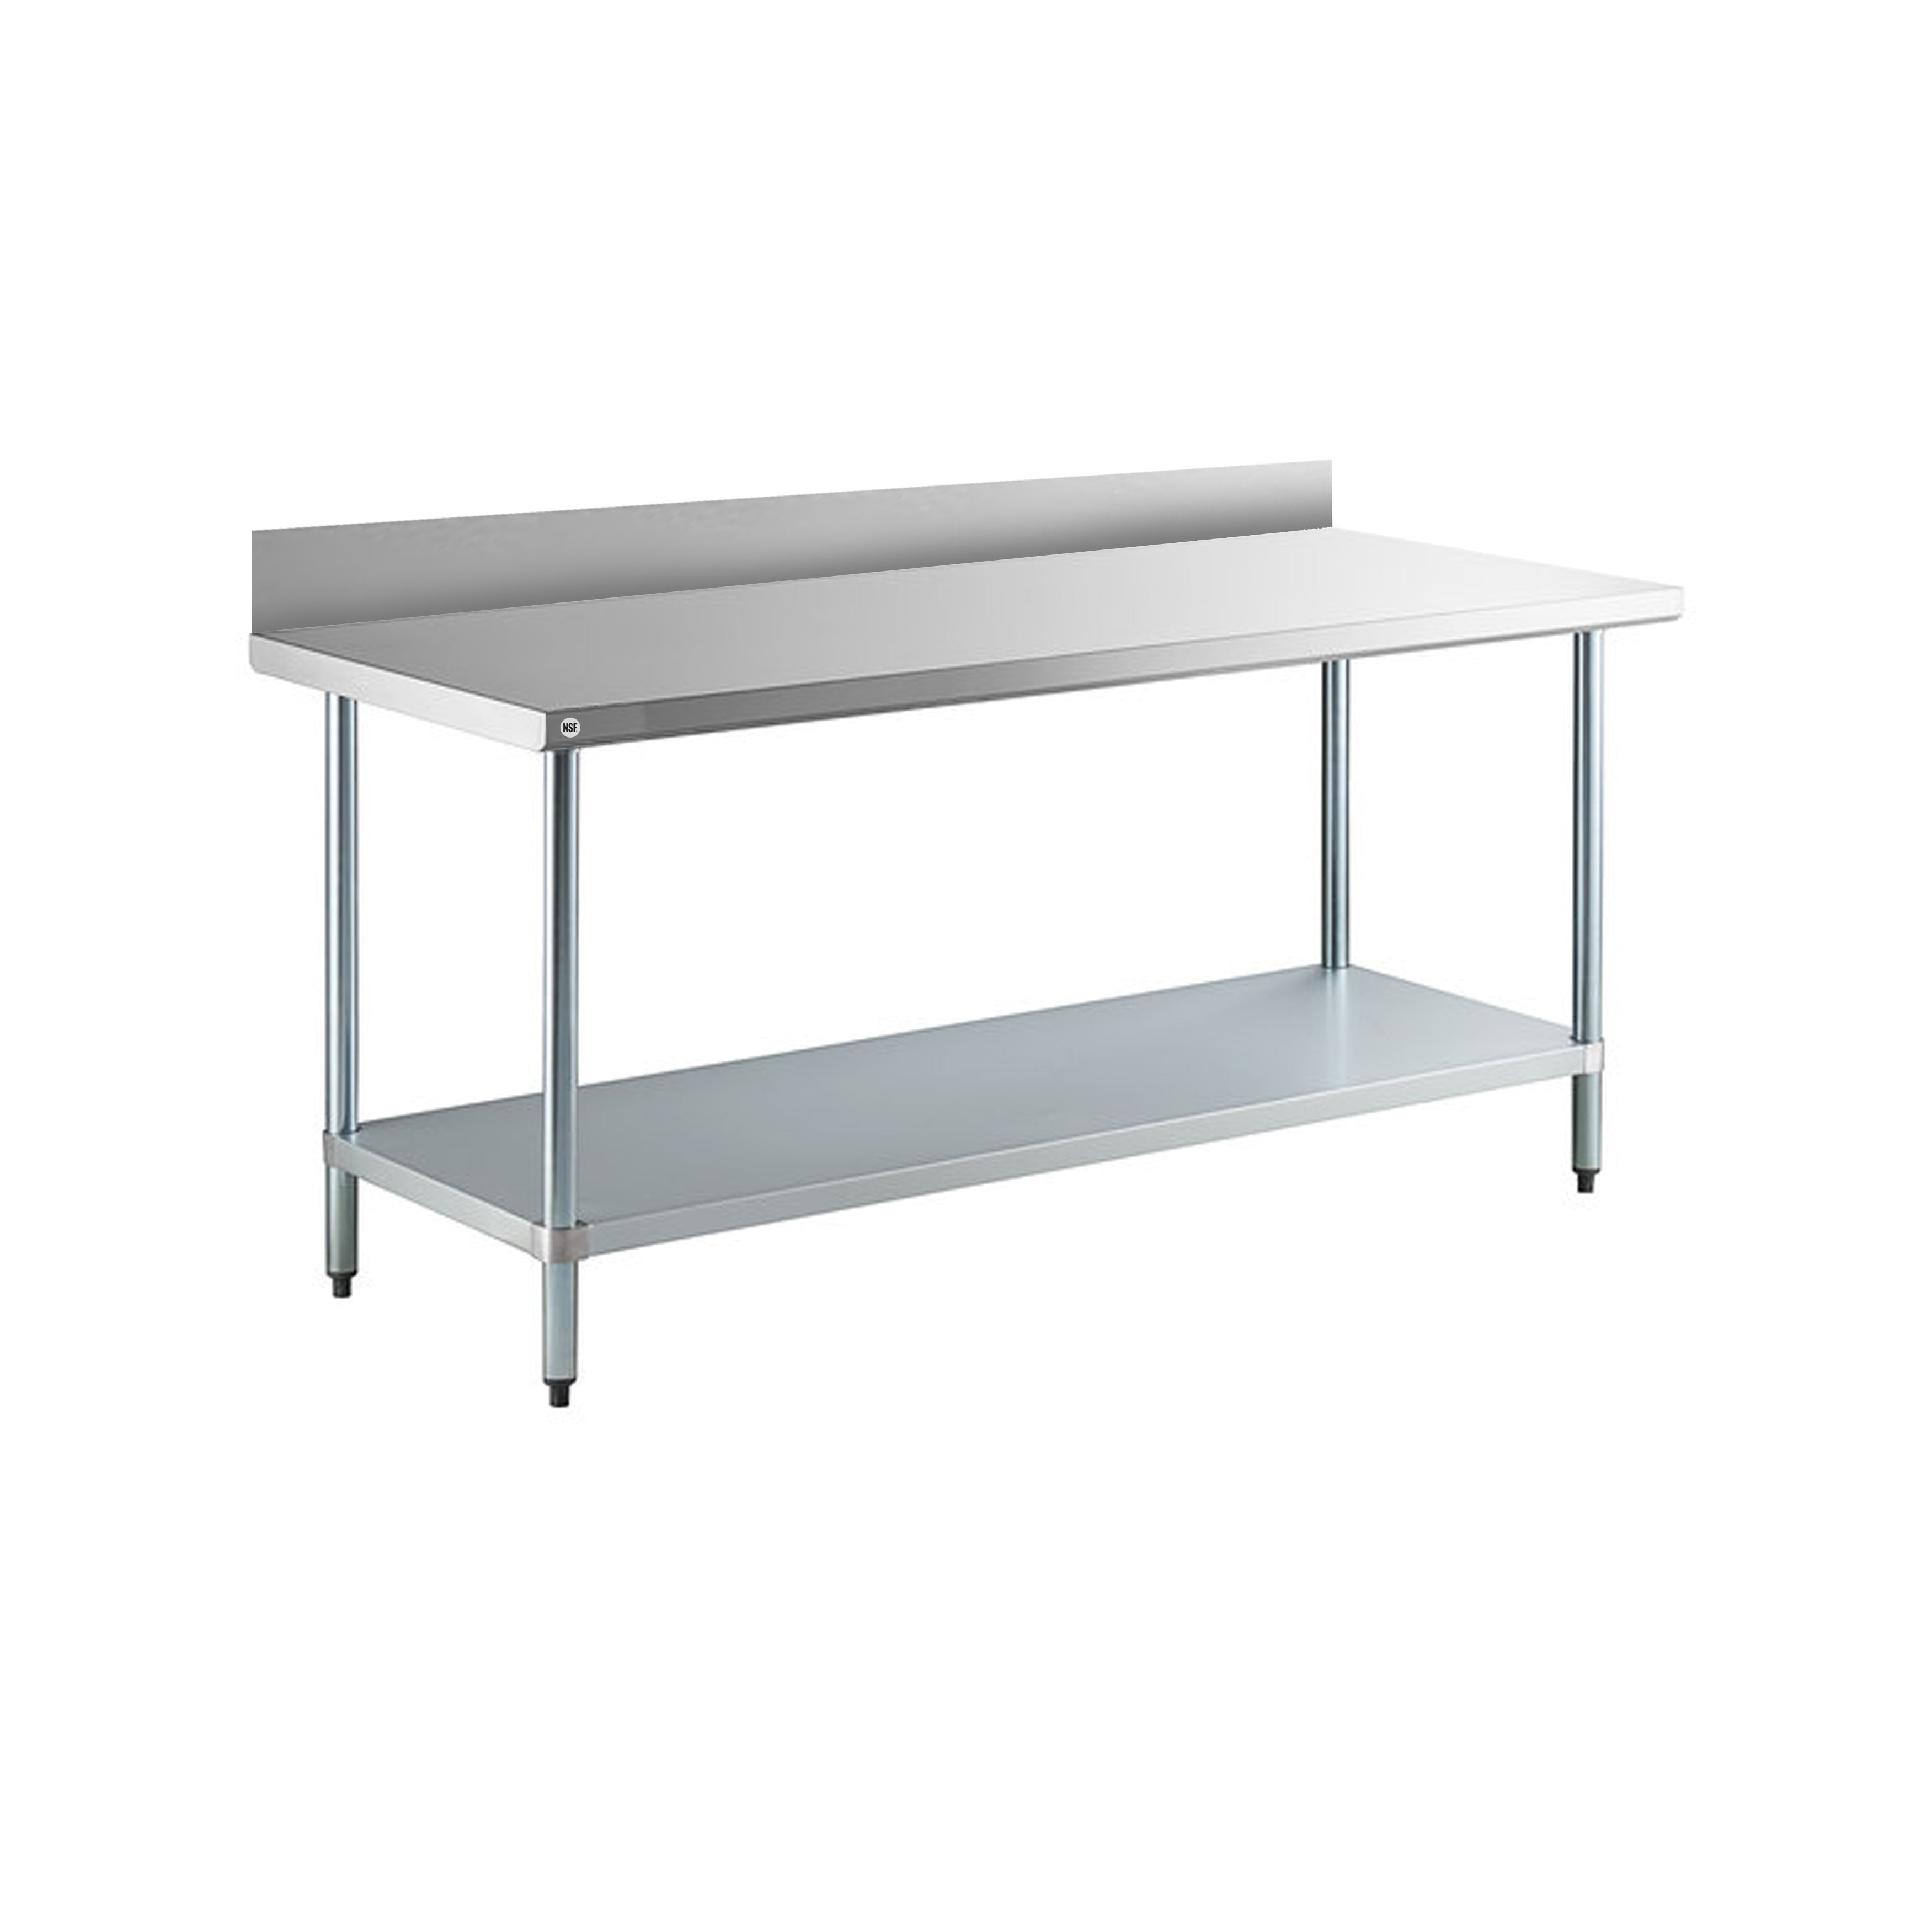 Omcan - 23798, Commercial 72" x 24" Stainless Steel Kitchen Work Table with 4" Back Splash 1200lbs Medium Duty